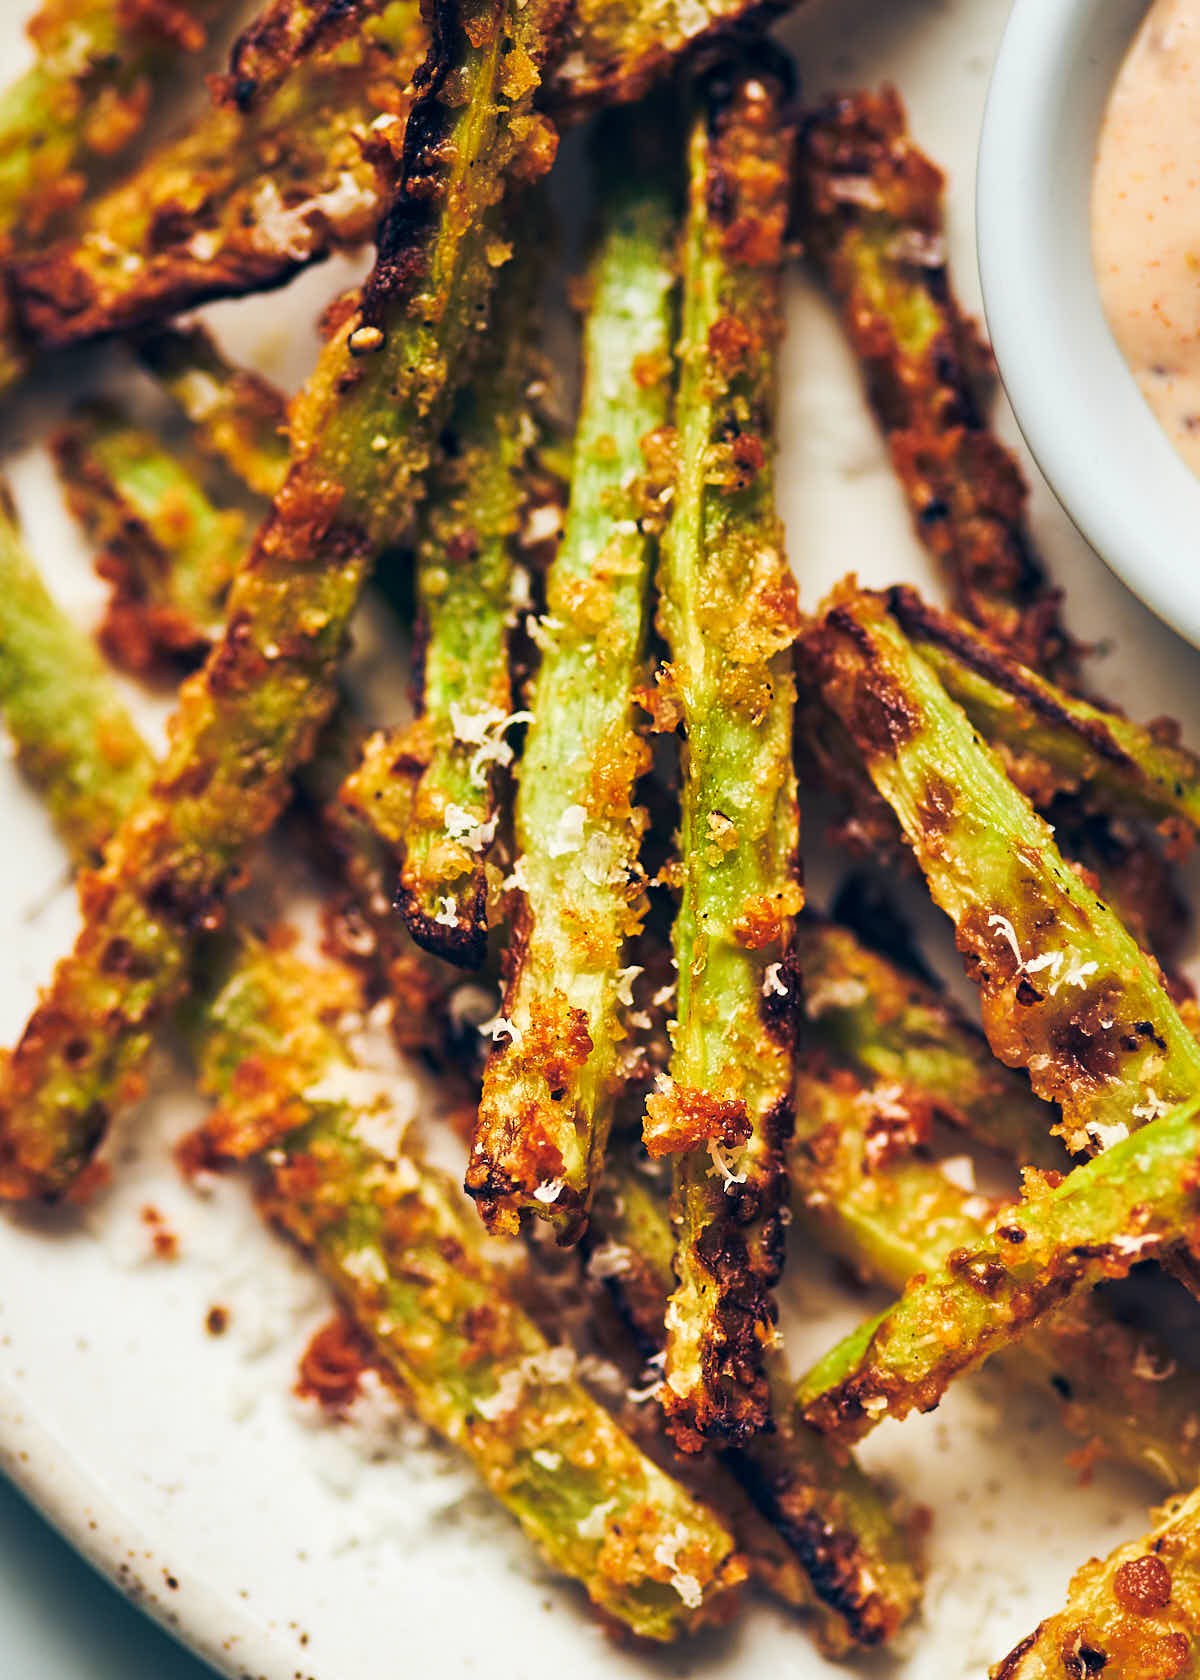 Close up photo showing texture of air fryer broccoli fries